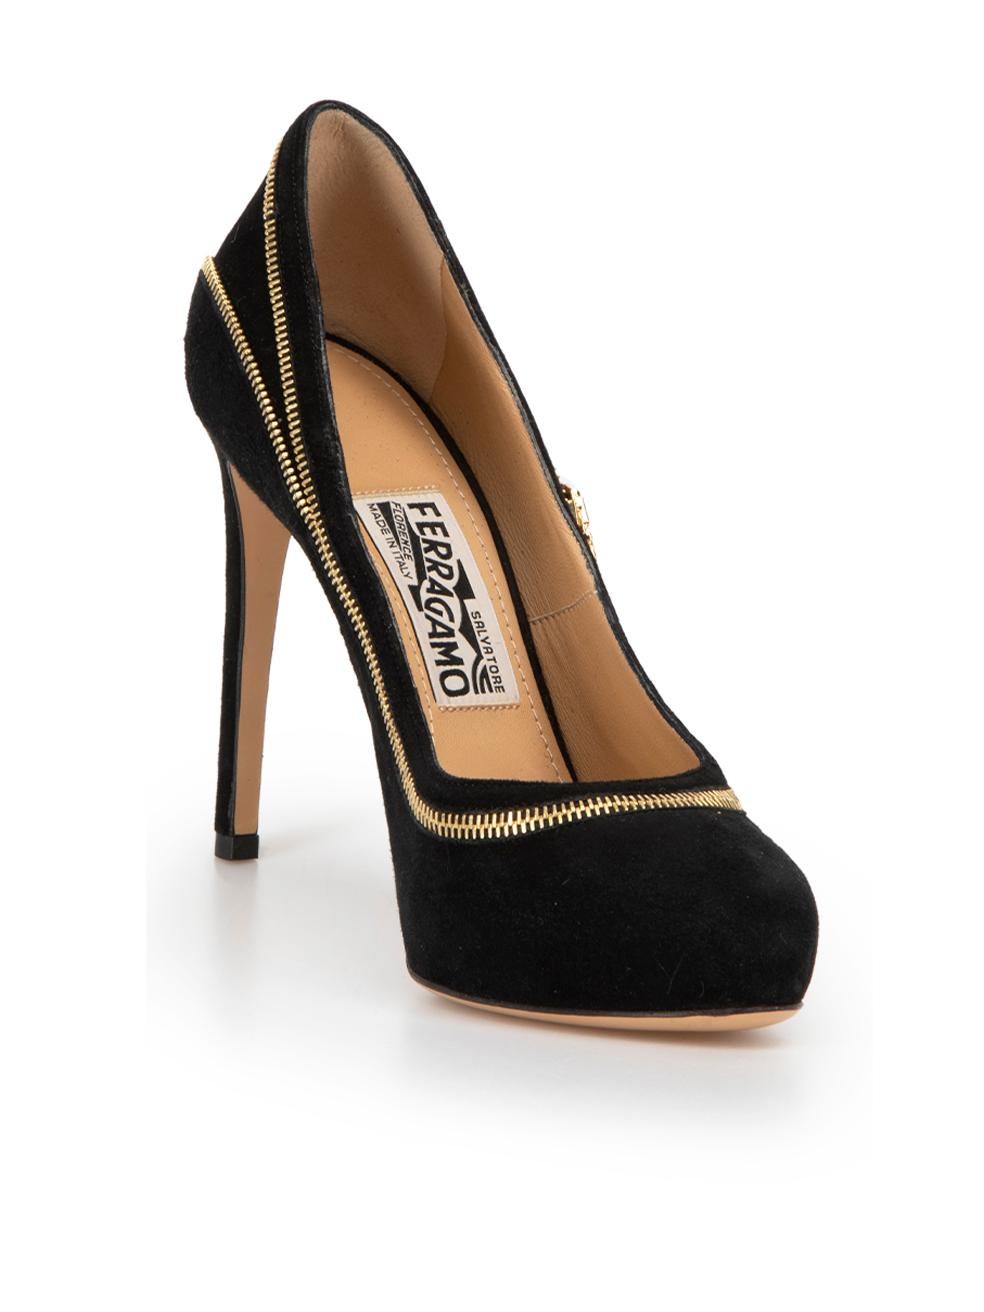 CONDITION is Very good. Minimal wear to heels is evident. Minimal wear to the suede exterior and there are scuffs to the heel stem on this used Salvatore Ferragamo designer resale item. 
 
 Details
  Black
 Suede
 Slip on pumps
 Almond toe
 Platform